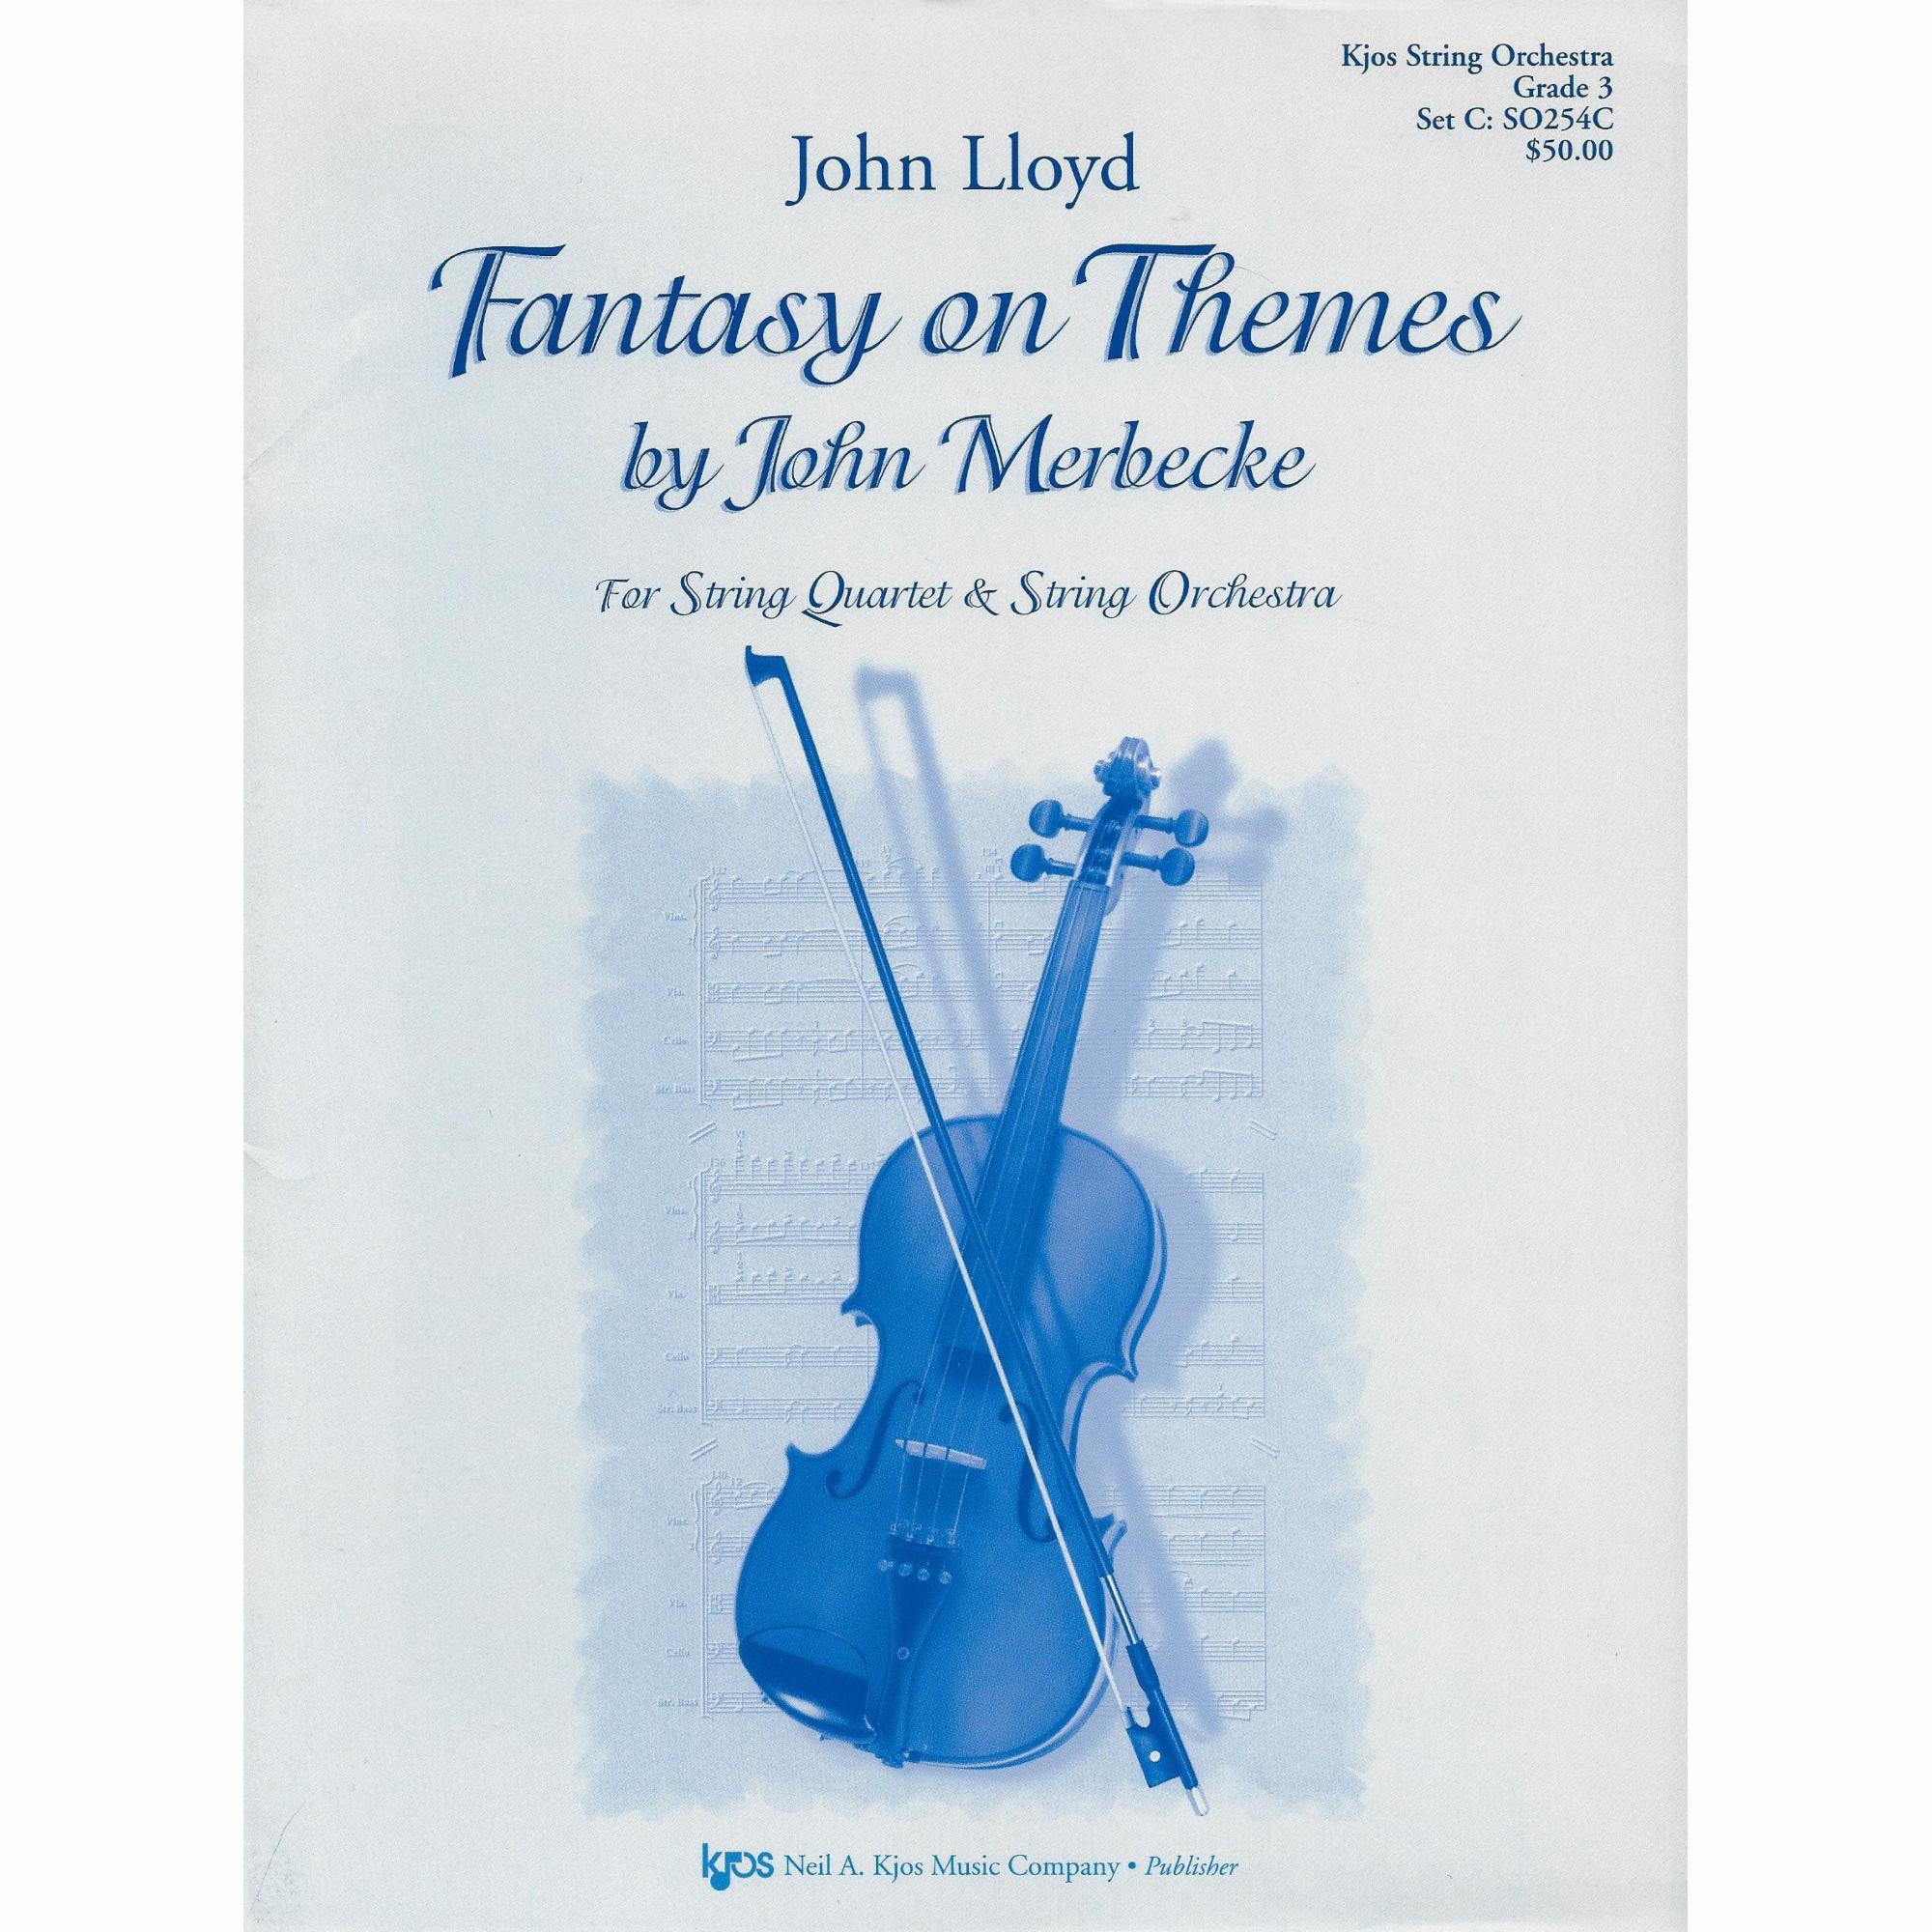 Fantasy on Themes by John Merbecke for String Orchestra